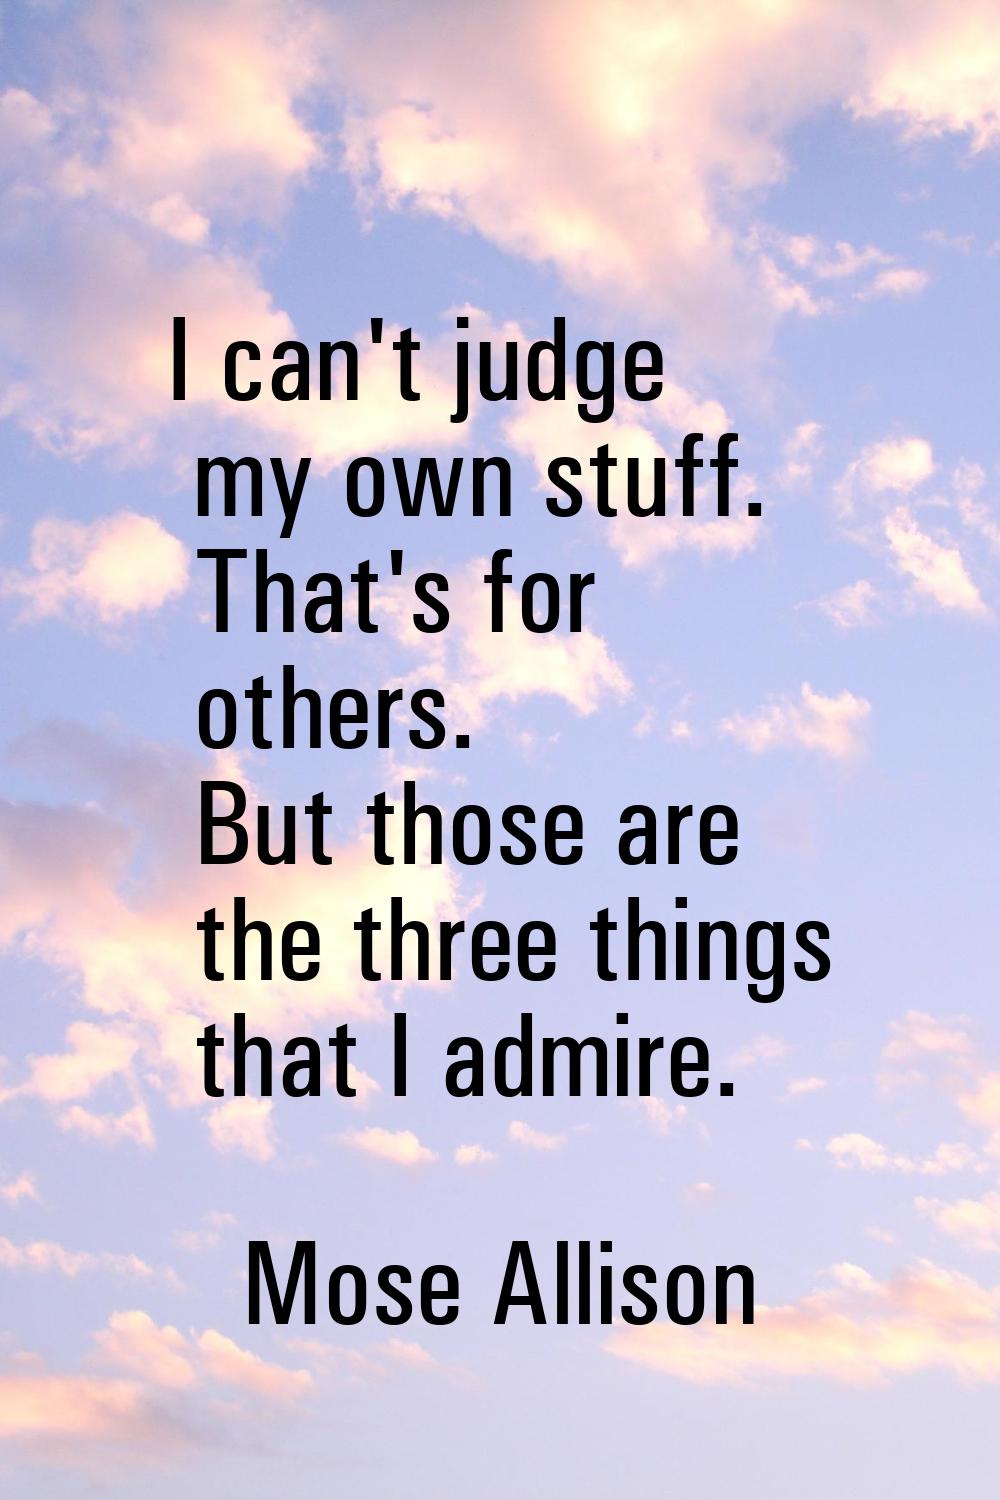 I can't judge my own stuff. That's for others. But those are the three things that I admire.